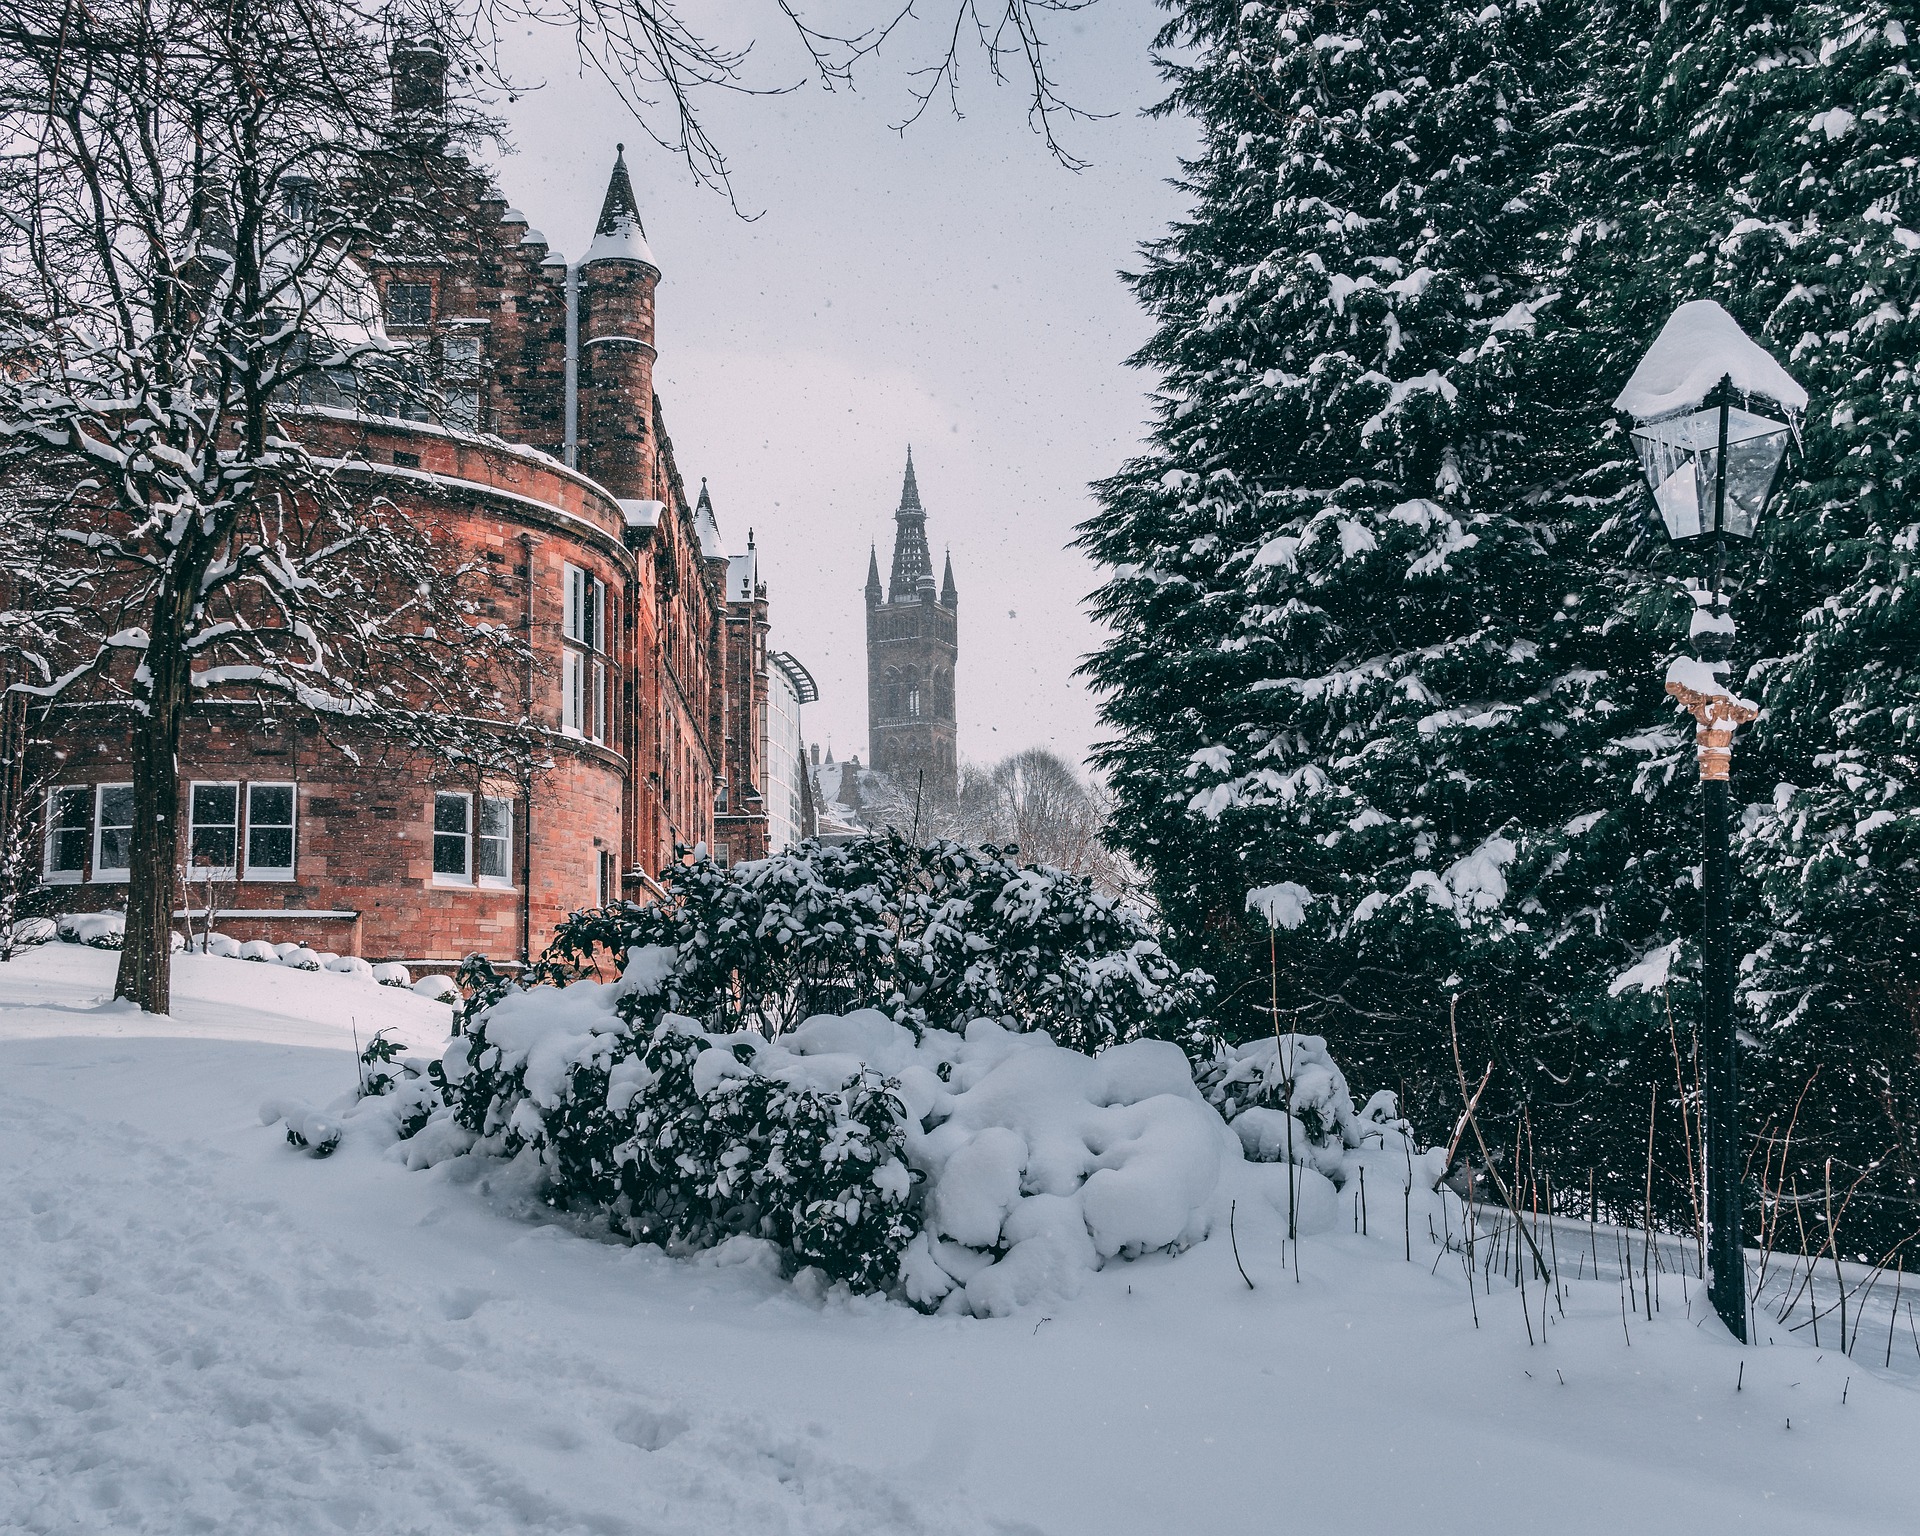 A snow-covered University of Glasgow